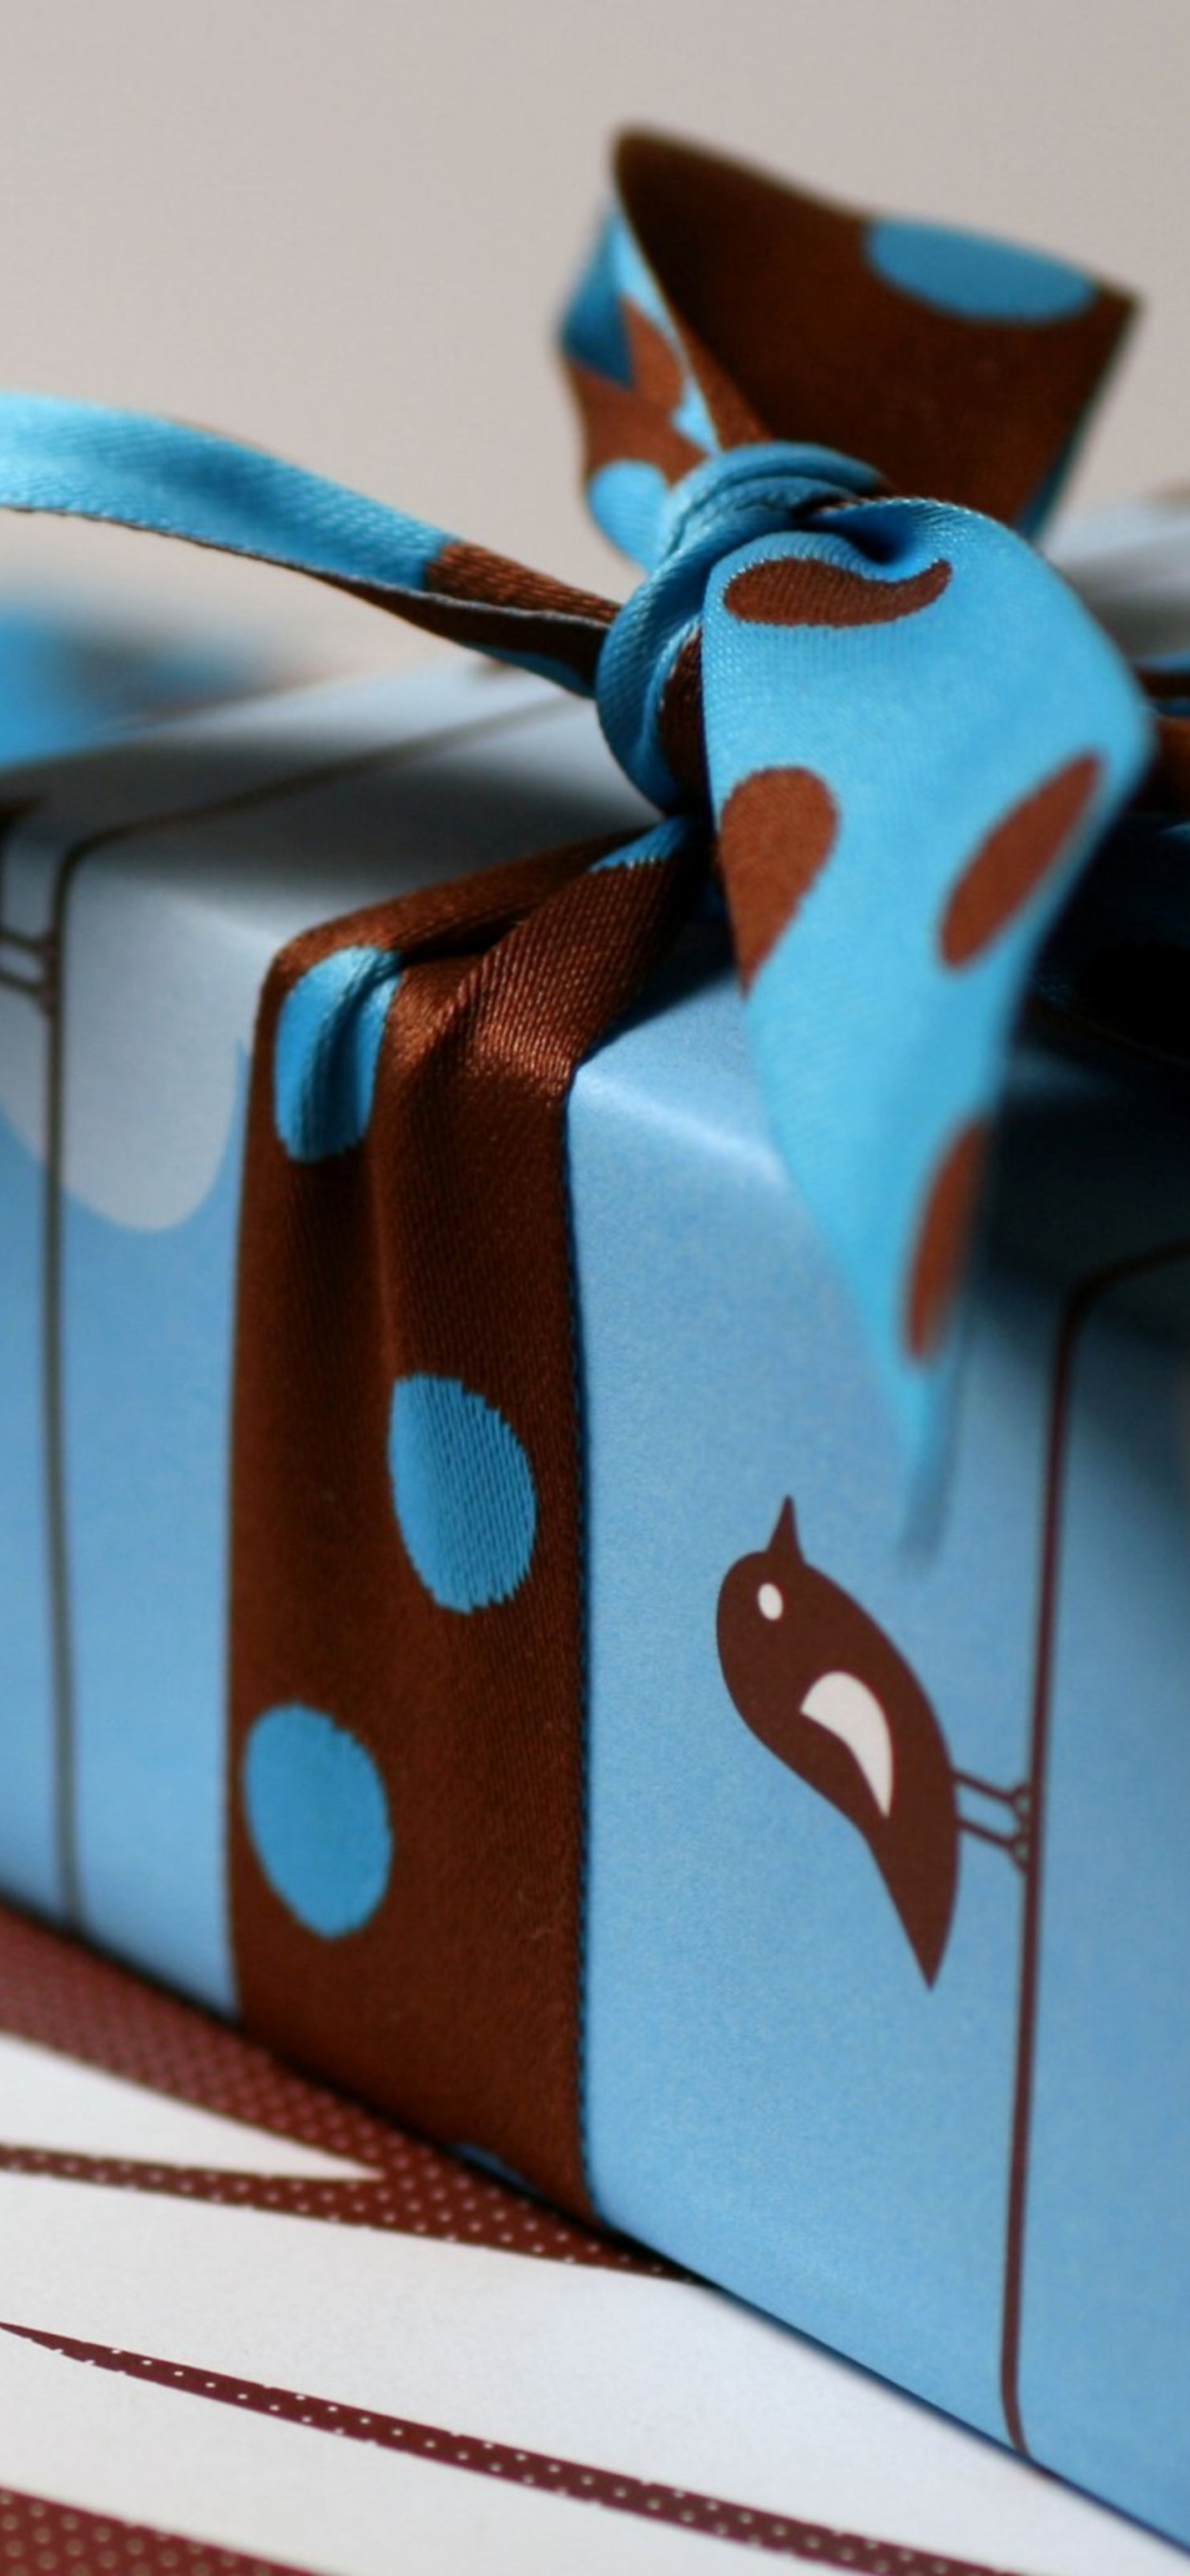 Gift, Box, Ribbon, Blue, Turquoise. Wallpaper in 1242x2688 Resolution